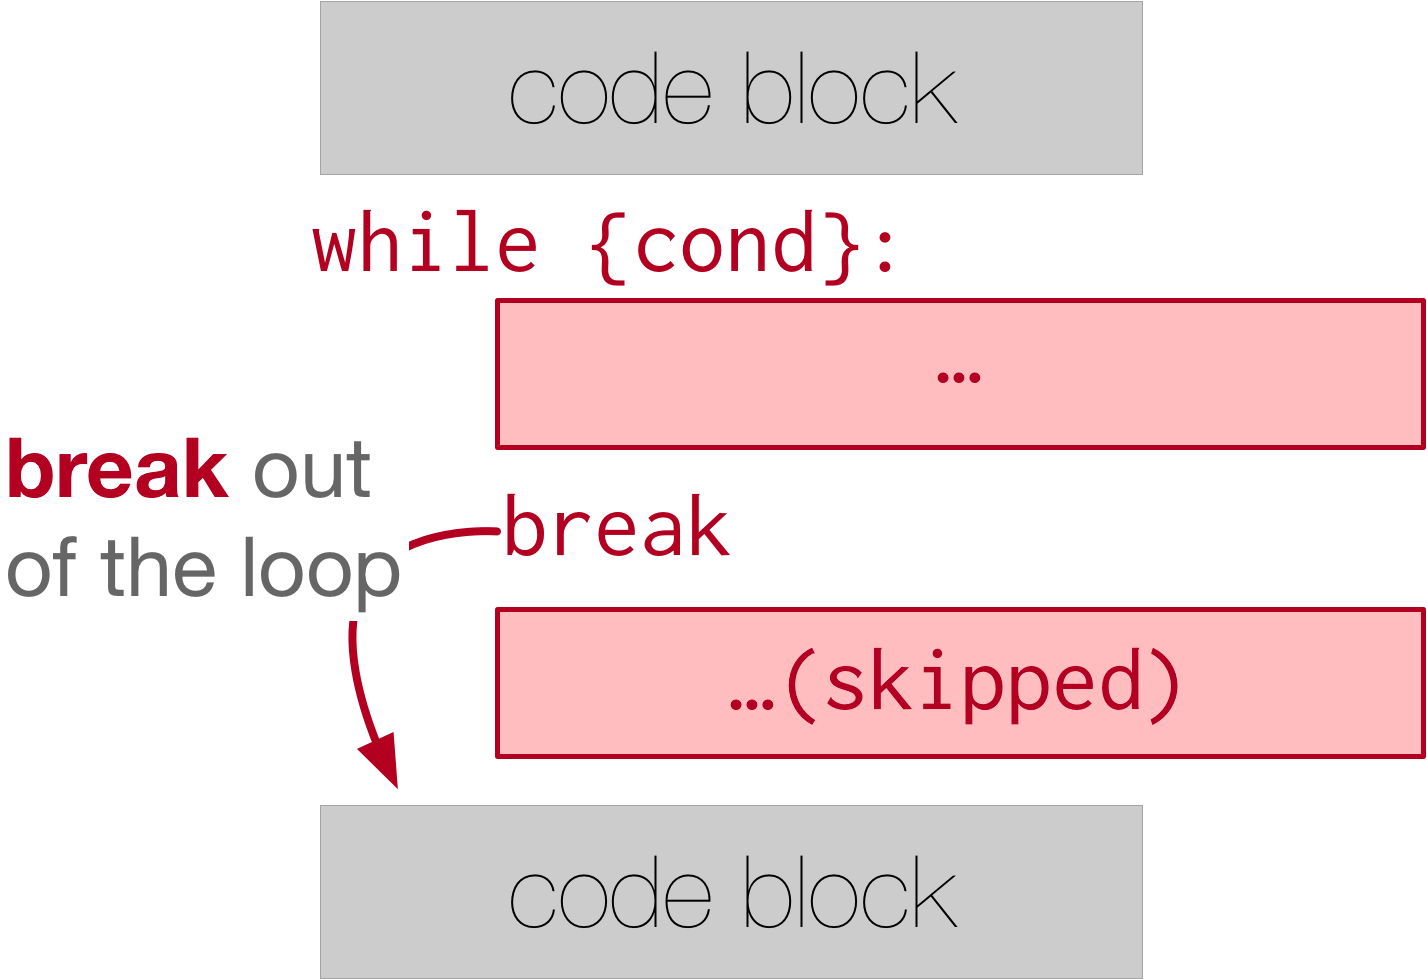 image showing a rectangle with "code block" written on it on top. Then, text that read "while {condition}": followed by an indented block with "..." written on it. break is then written and another indented block is placed after the phrase break, which has "... (skipped)" written on it. Finally, an unindented block belonging to code outside the while loop is at the bottom. It says "code block". An arrow points from the word break to the unindented block at the bottom and the phrase "break out of the loop" is written.